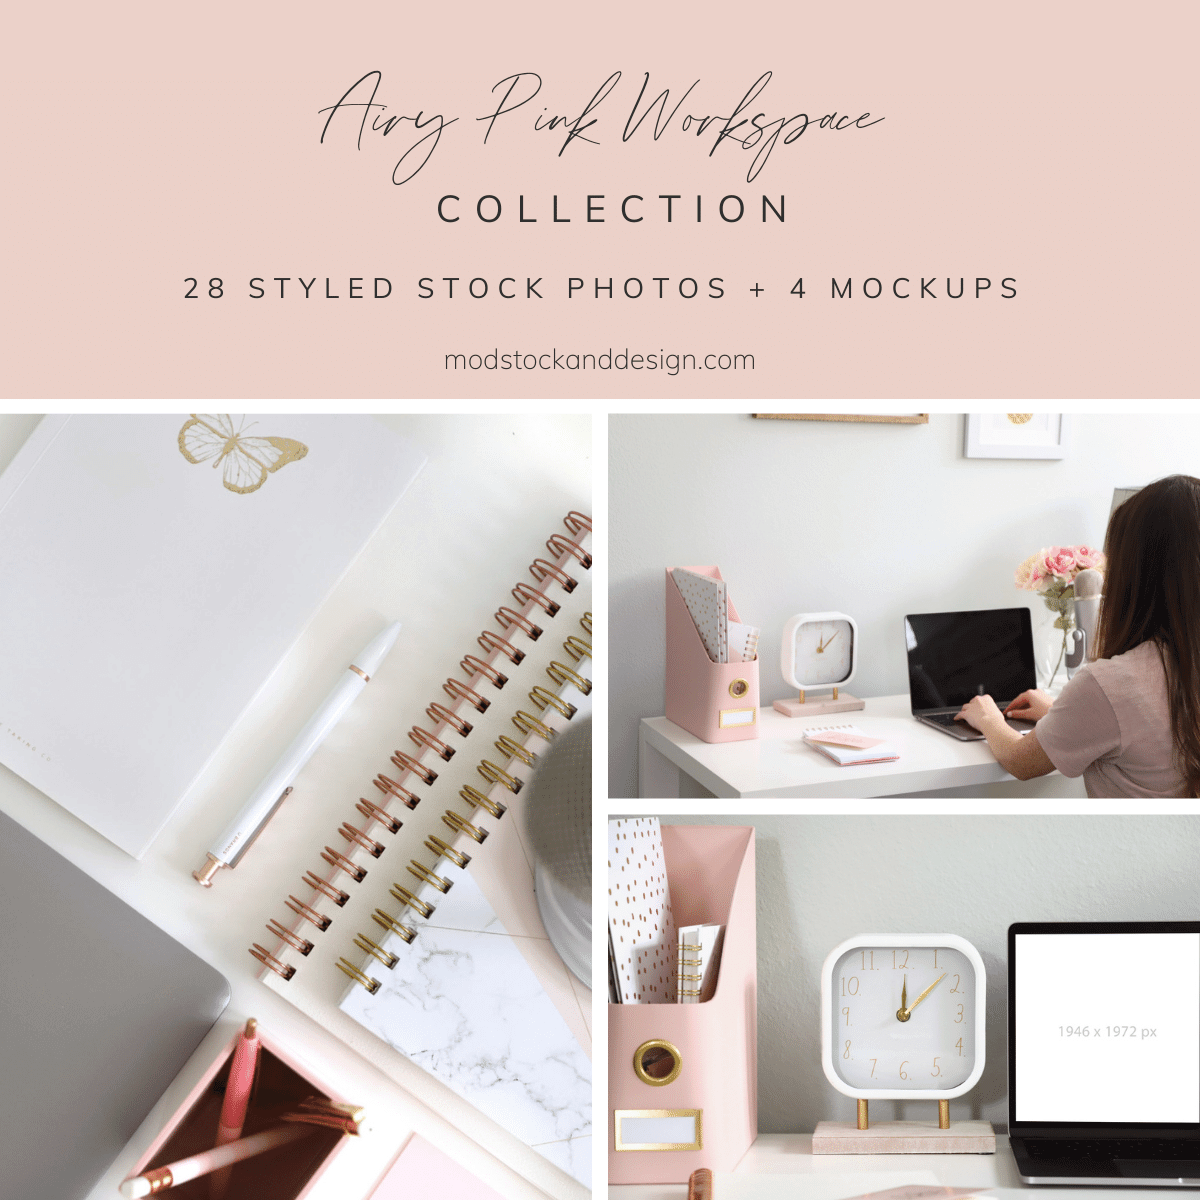 Airy Pink Workspace Product Image